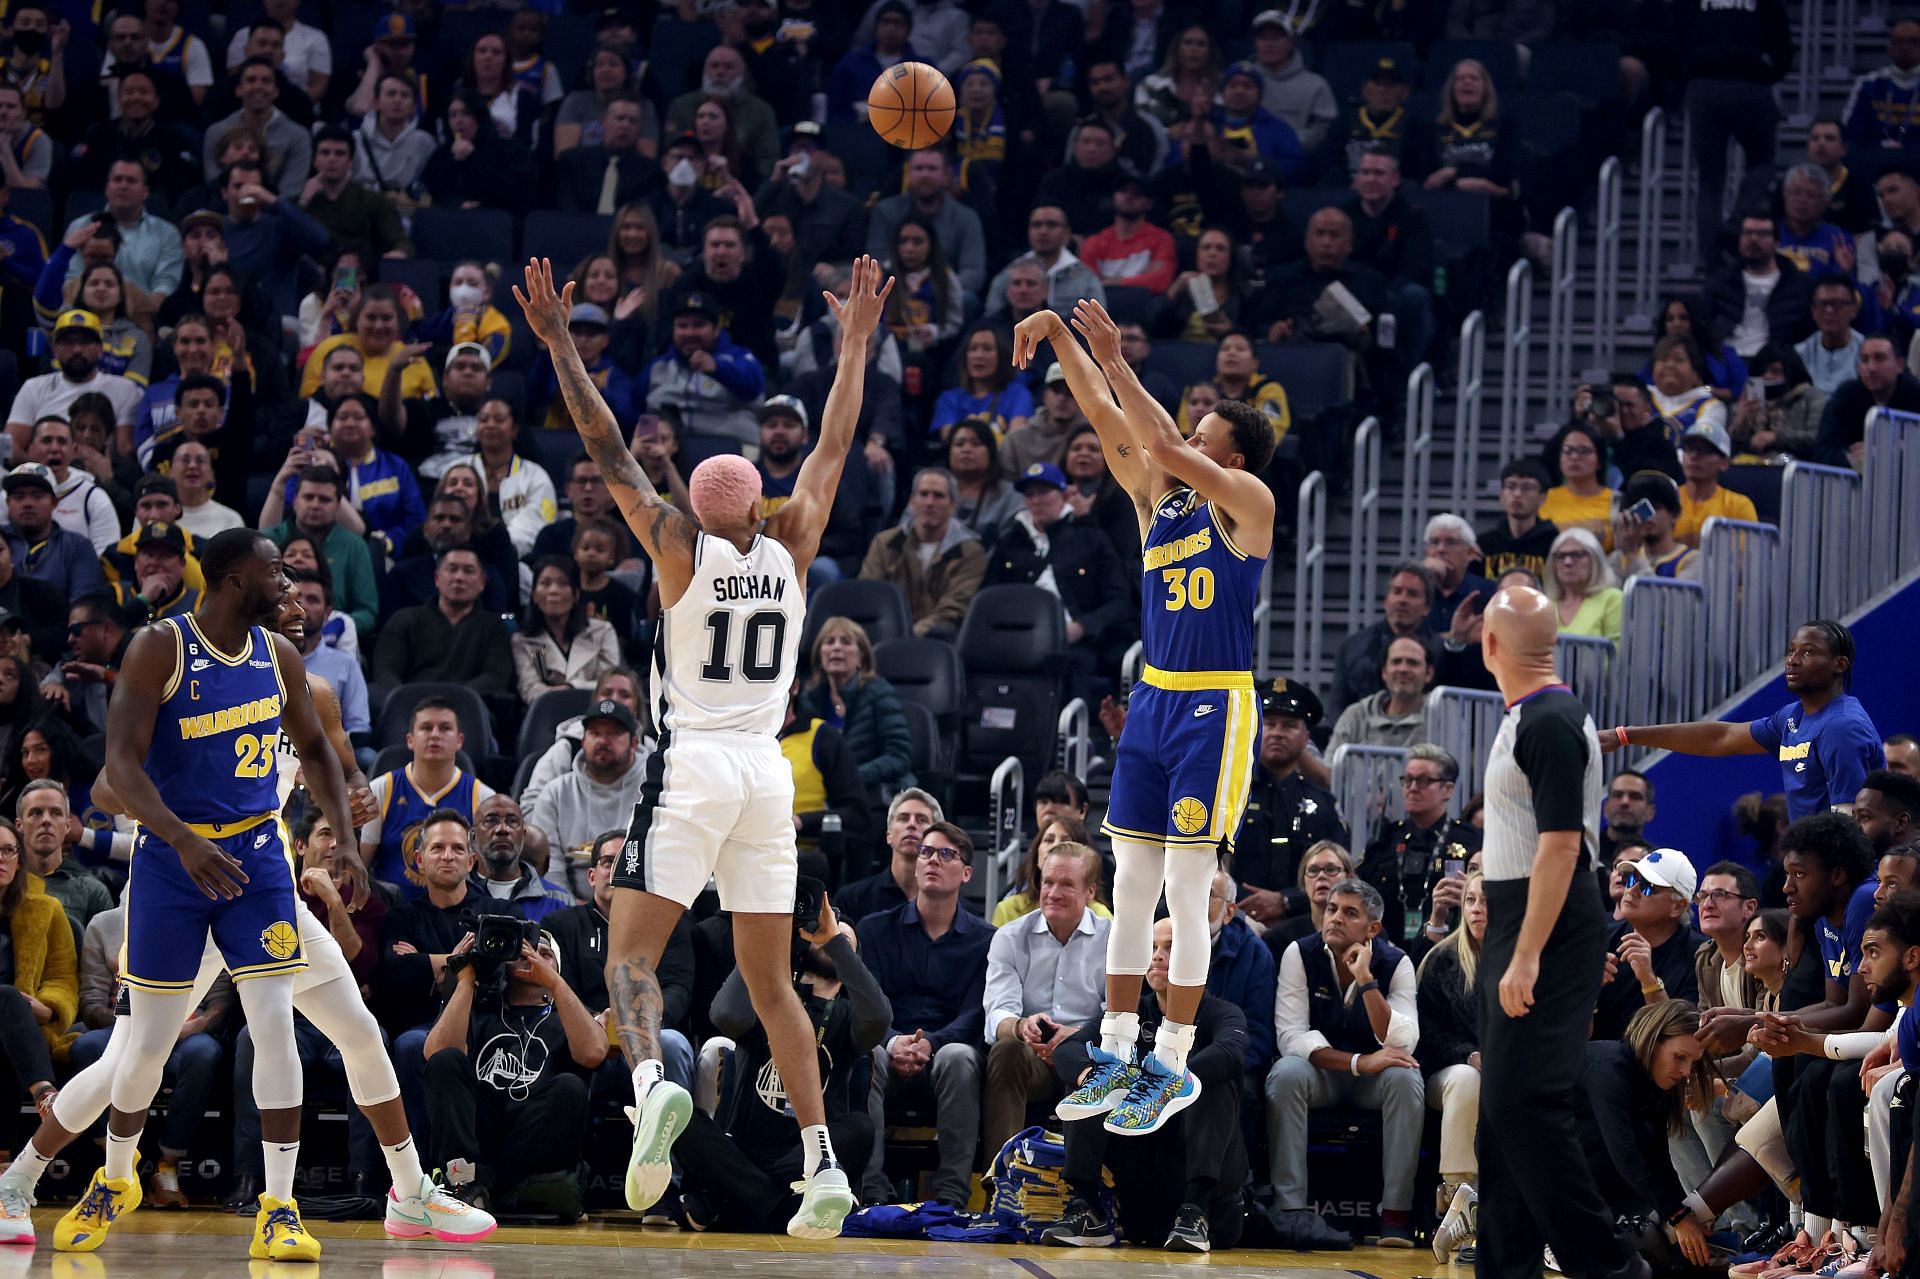 Pete Davidson Makes a Cameo on Stephen Curry 3-Point Card -- Sort Of